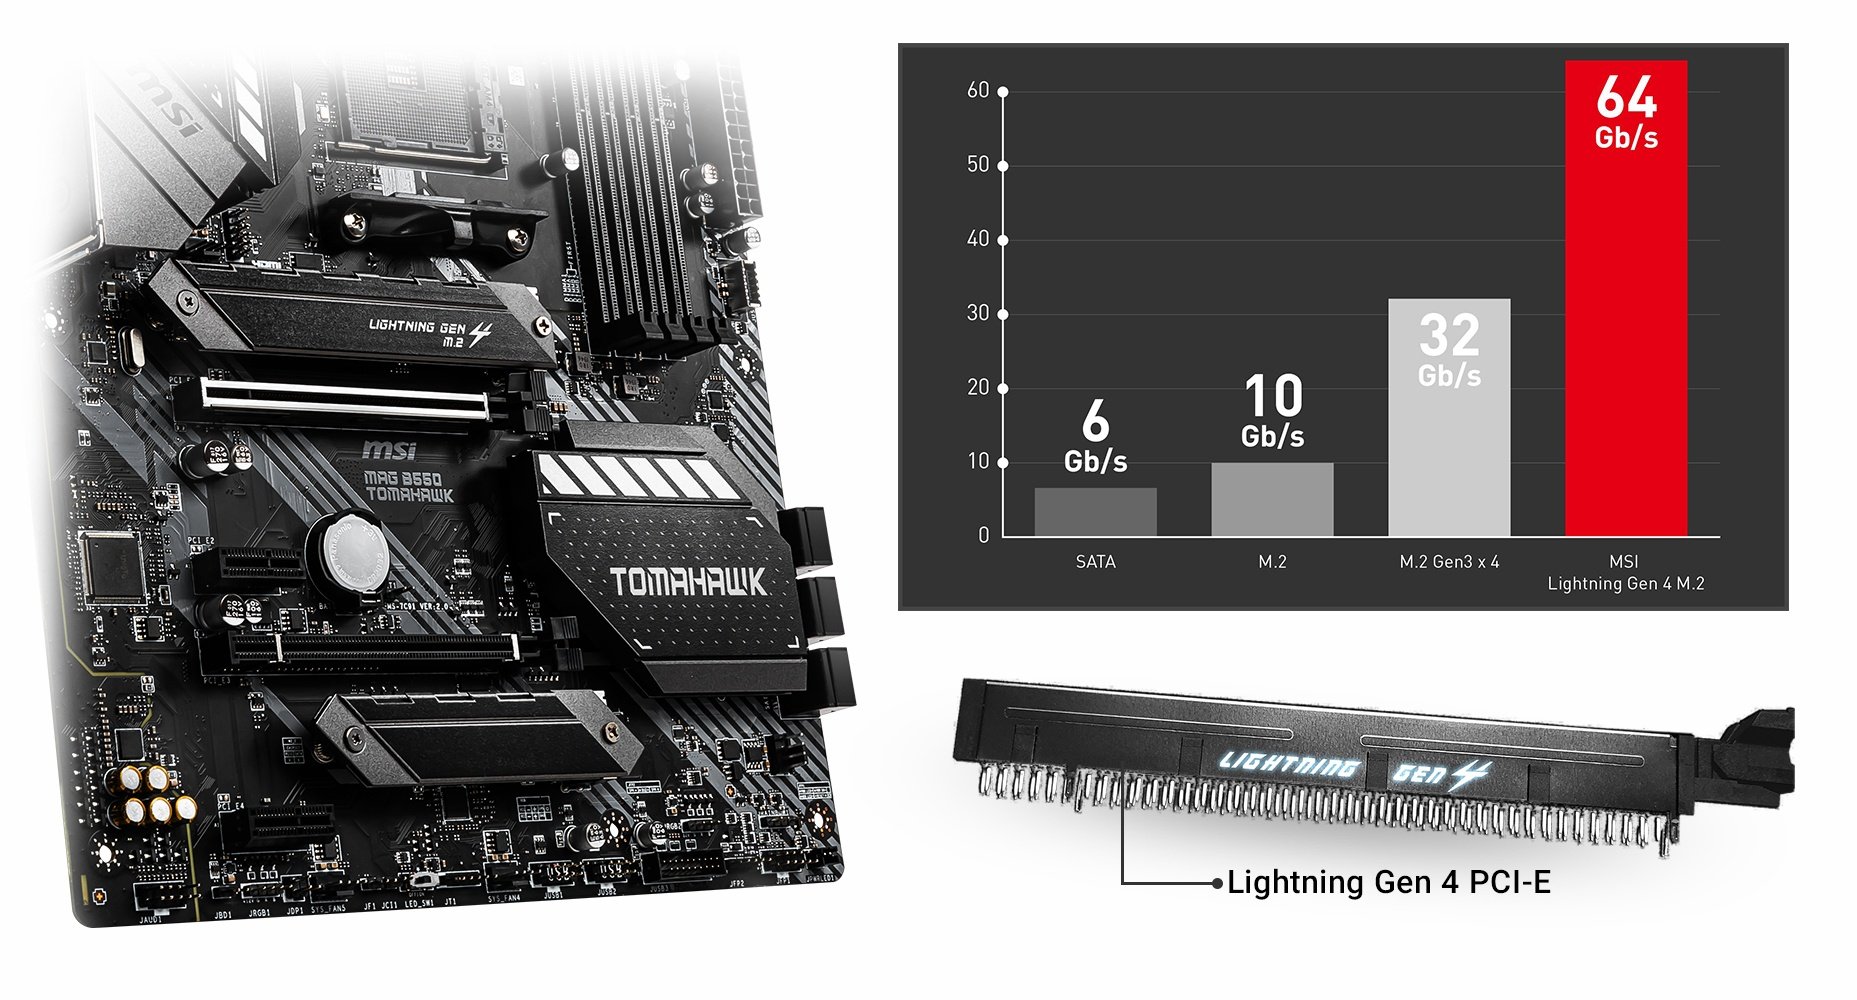 the chart of the motherboard between SATA, M.2 M.2 Gen3x4 and MSI